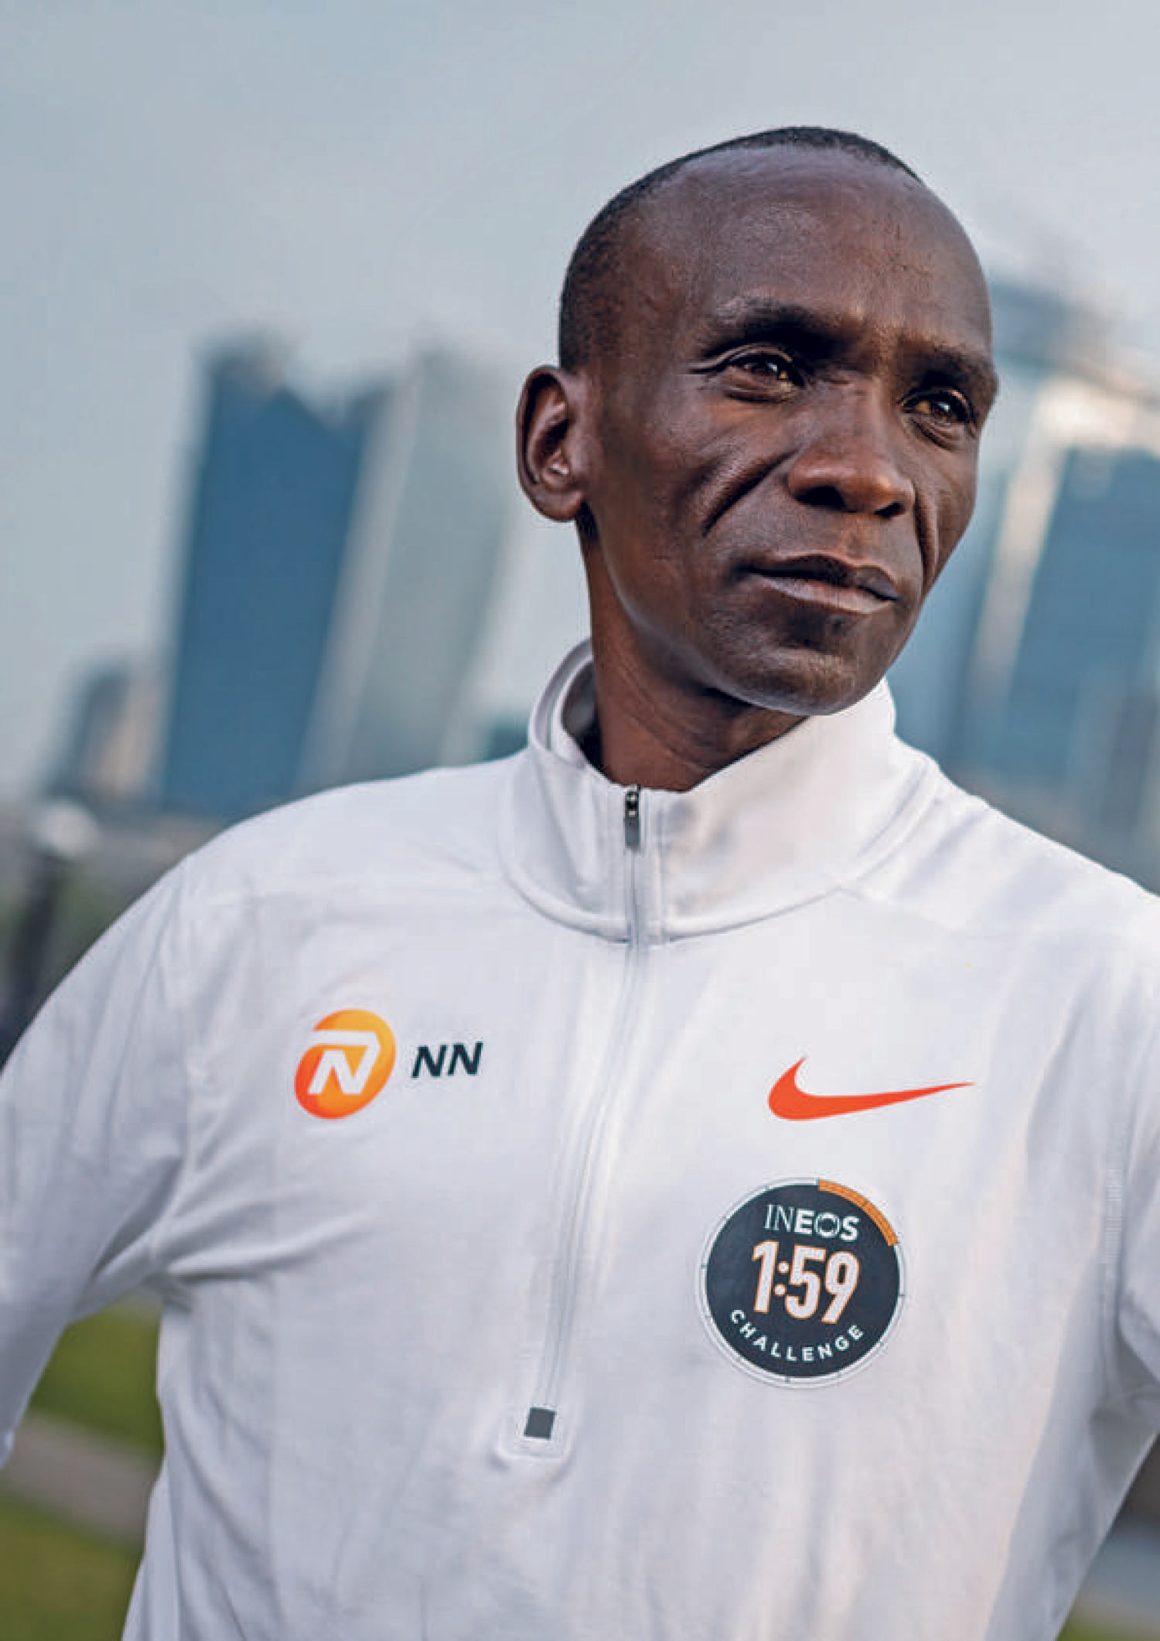 Fellow athletes marvel at Eliud Kipchoge's ability to keep going, even in the face of physical pain and other challenges that crop up. | Image: INEOS